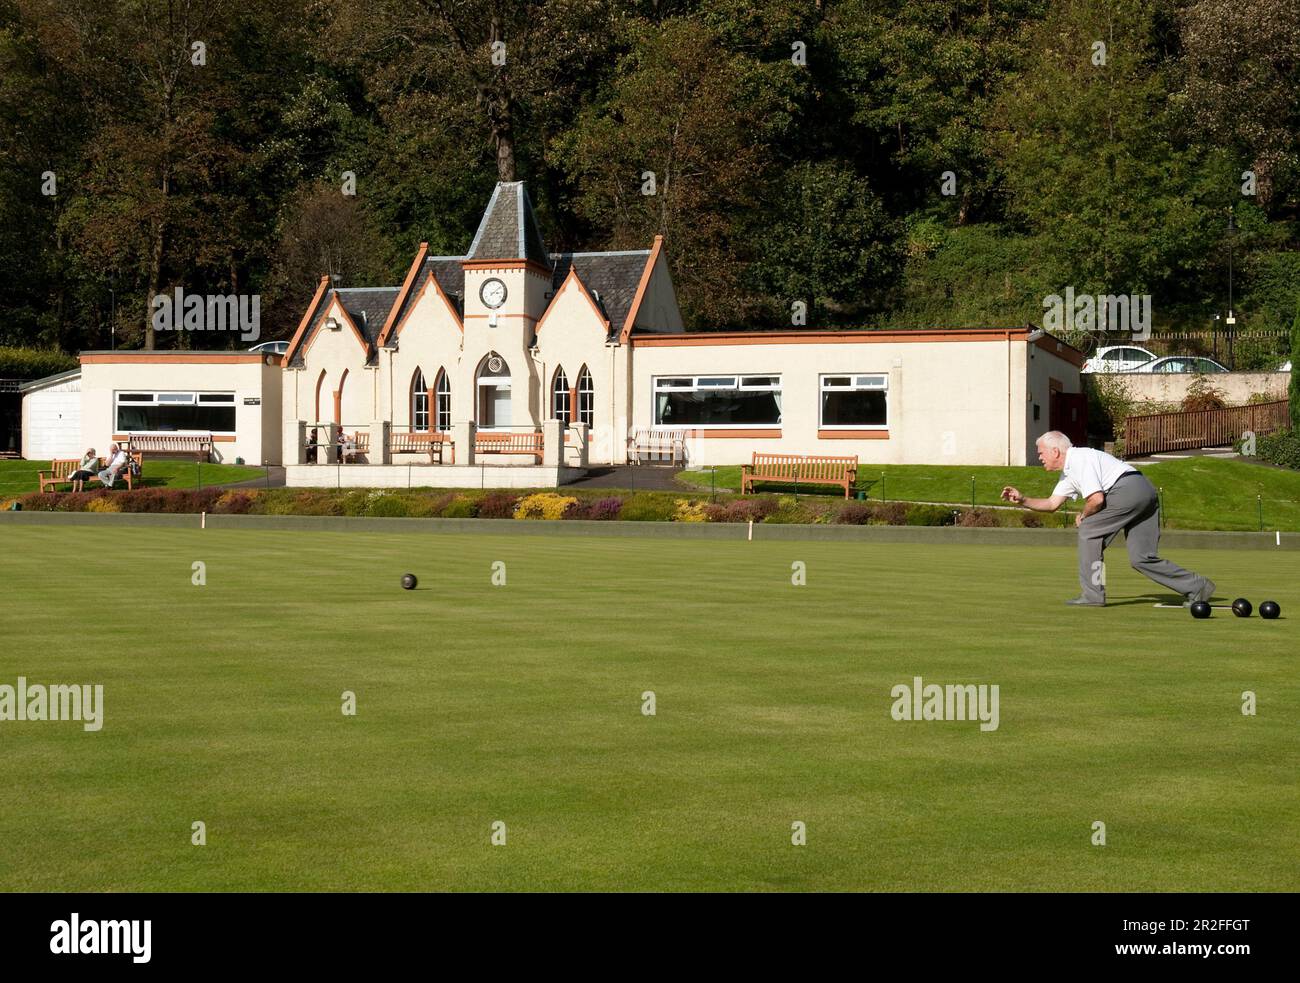 Bowls in play in front of the pavilion of the Stirling lawn bowling club  green in Stirling, Scotland, UK Stock Photo - Alamy